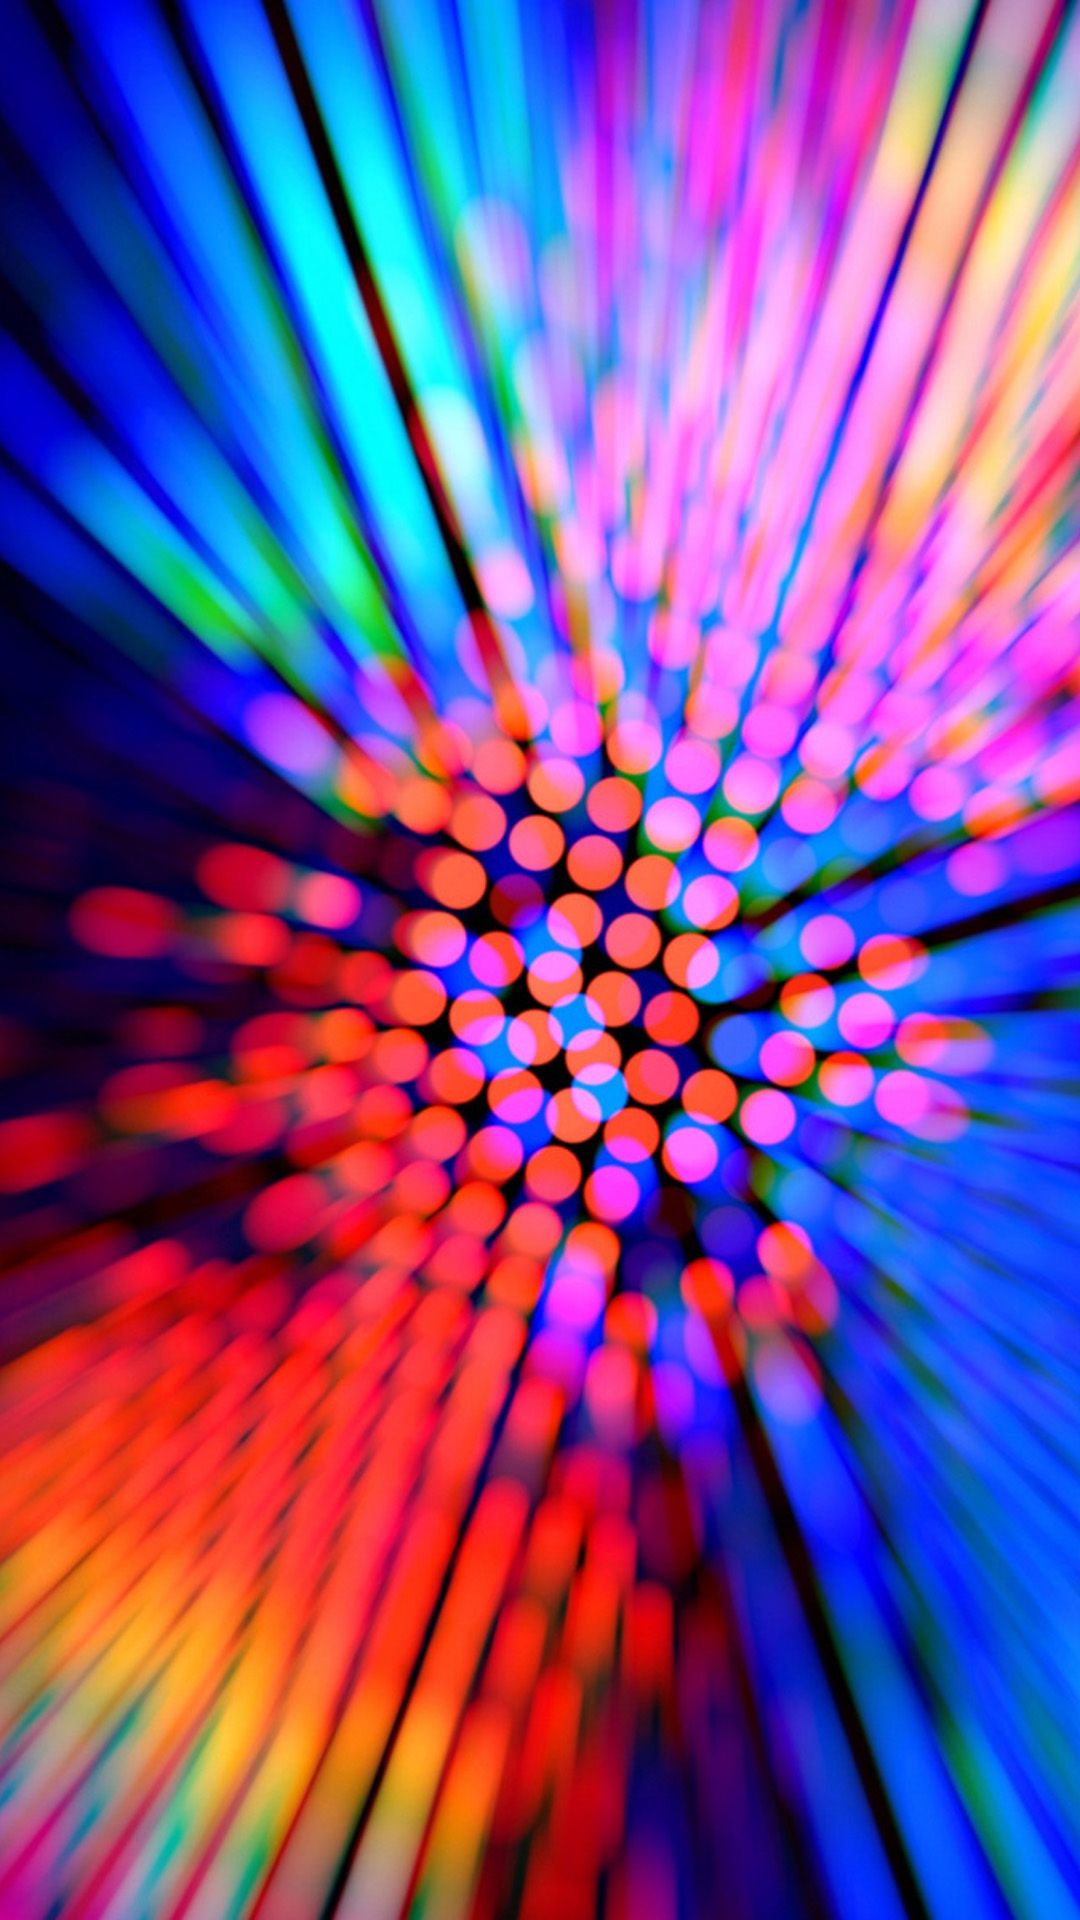 Colorful s4 Wallpaper 46886 1080x1920px